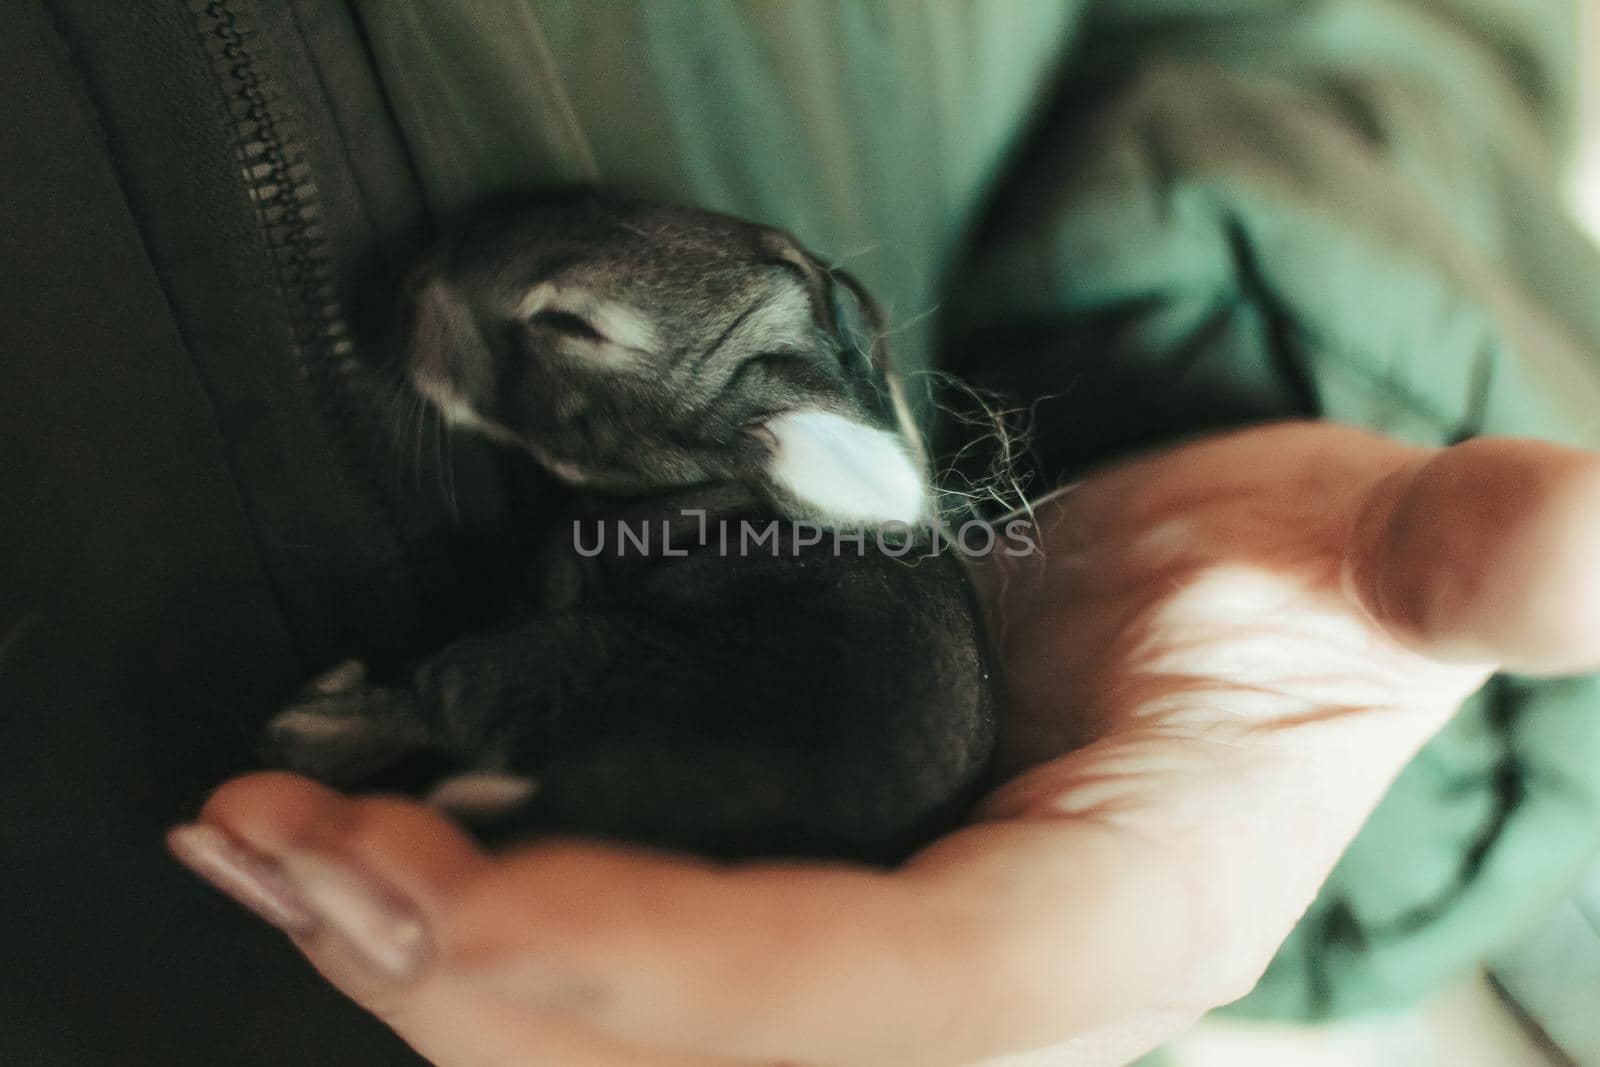 The newborn rabbit warmed itself in the woman's palms and fell asleep.